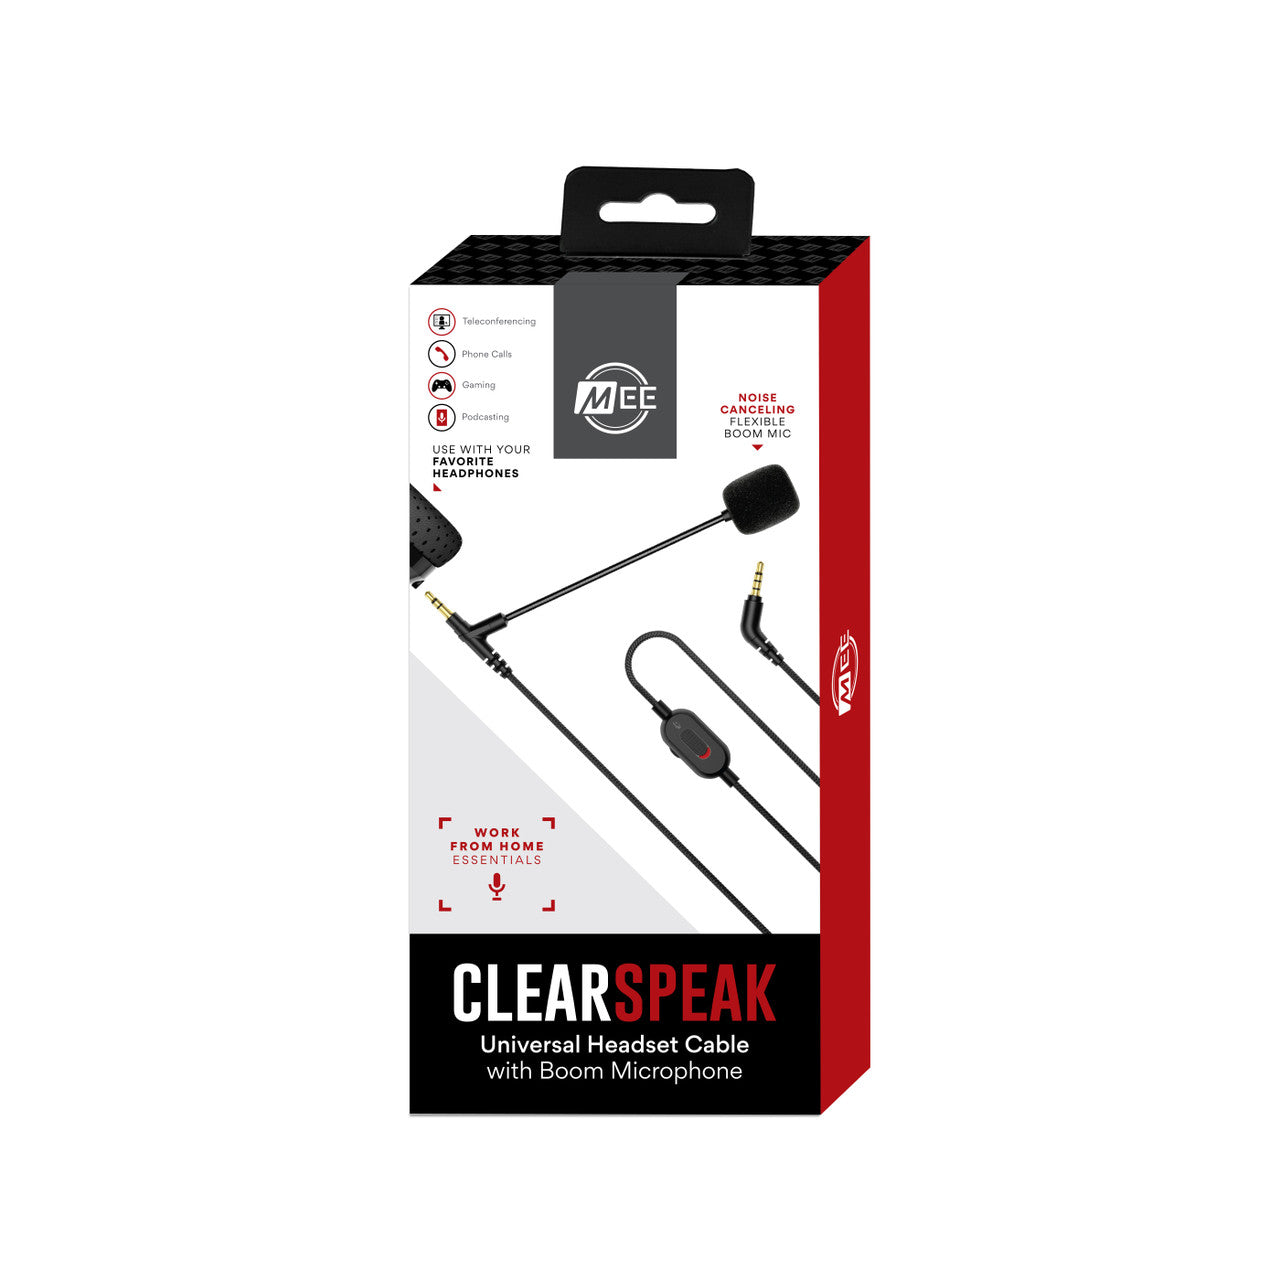 Image of ClearSpeak Universal 3.5 mm Audio Cable with Boom Mic.